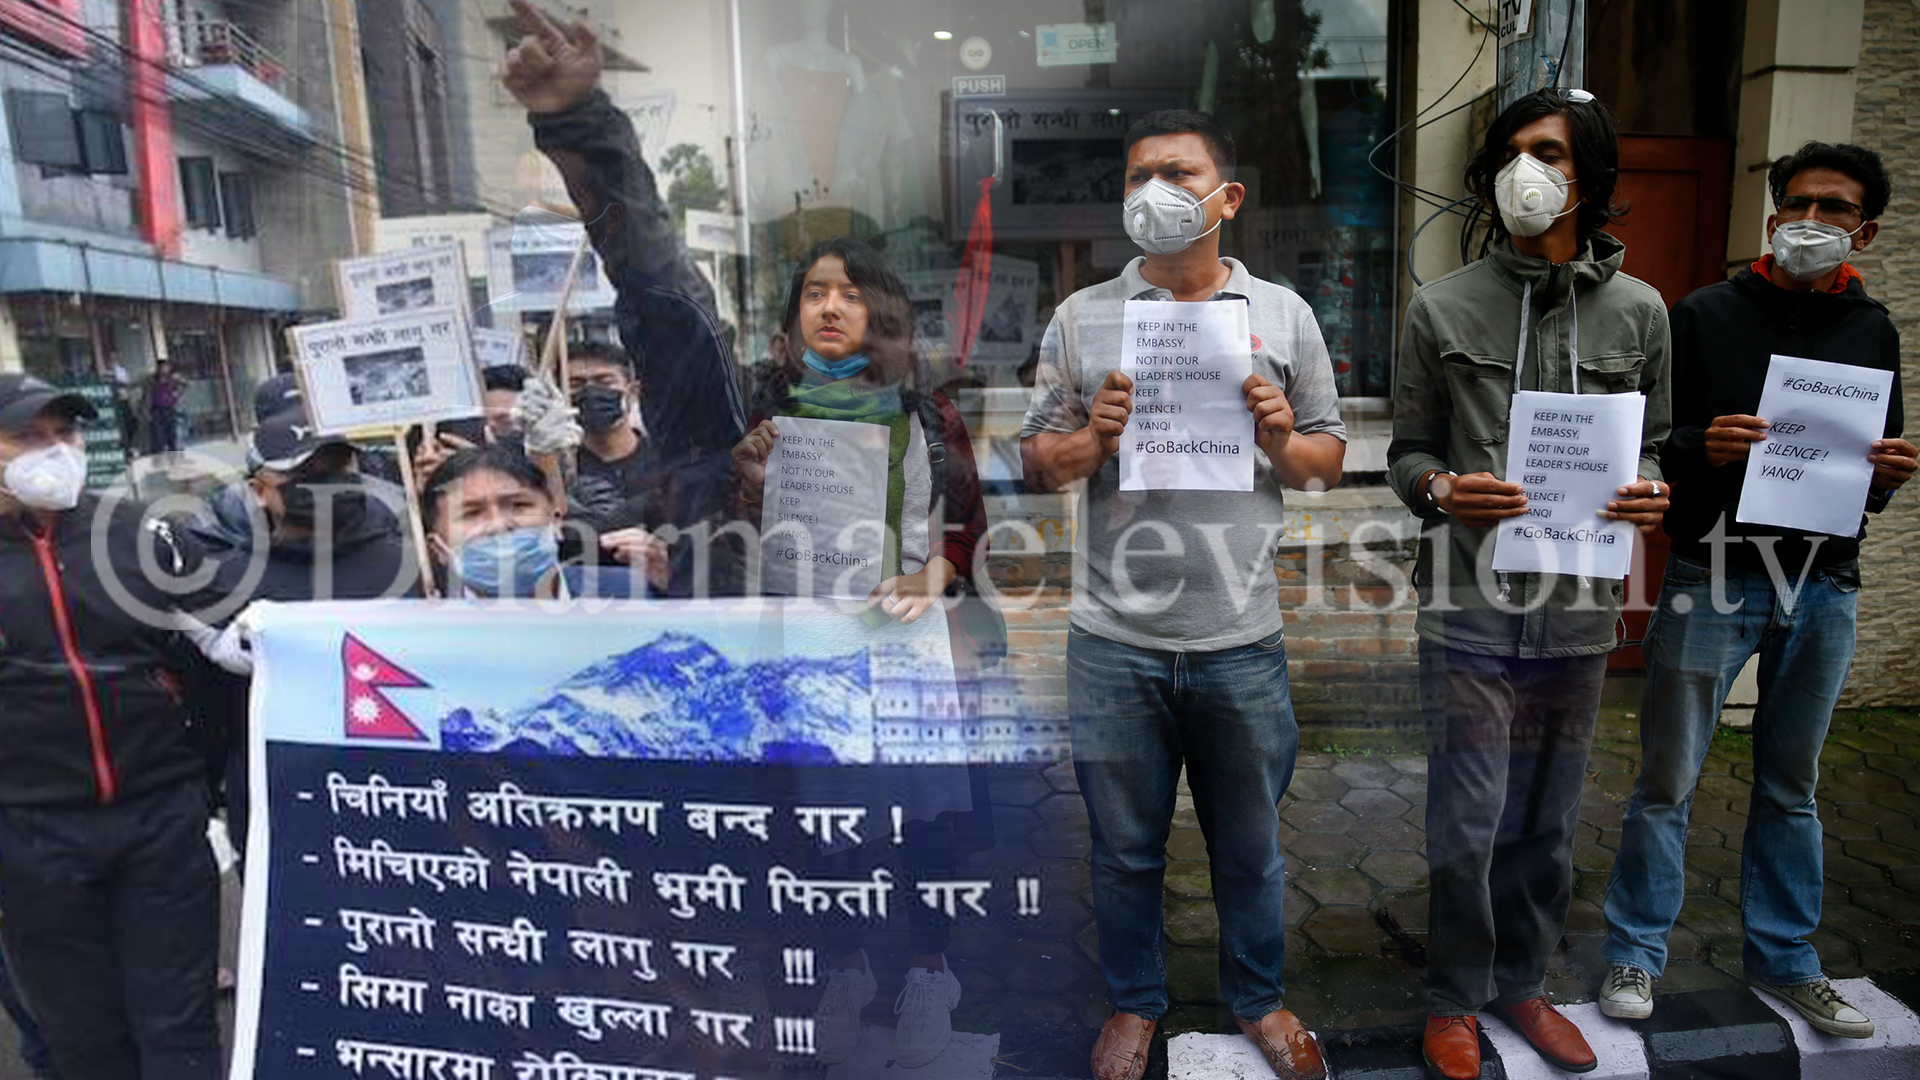 Youths protest against China in Kathmandu